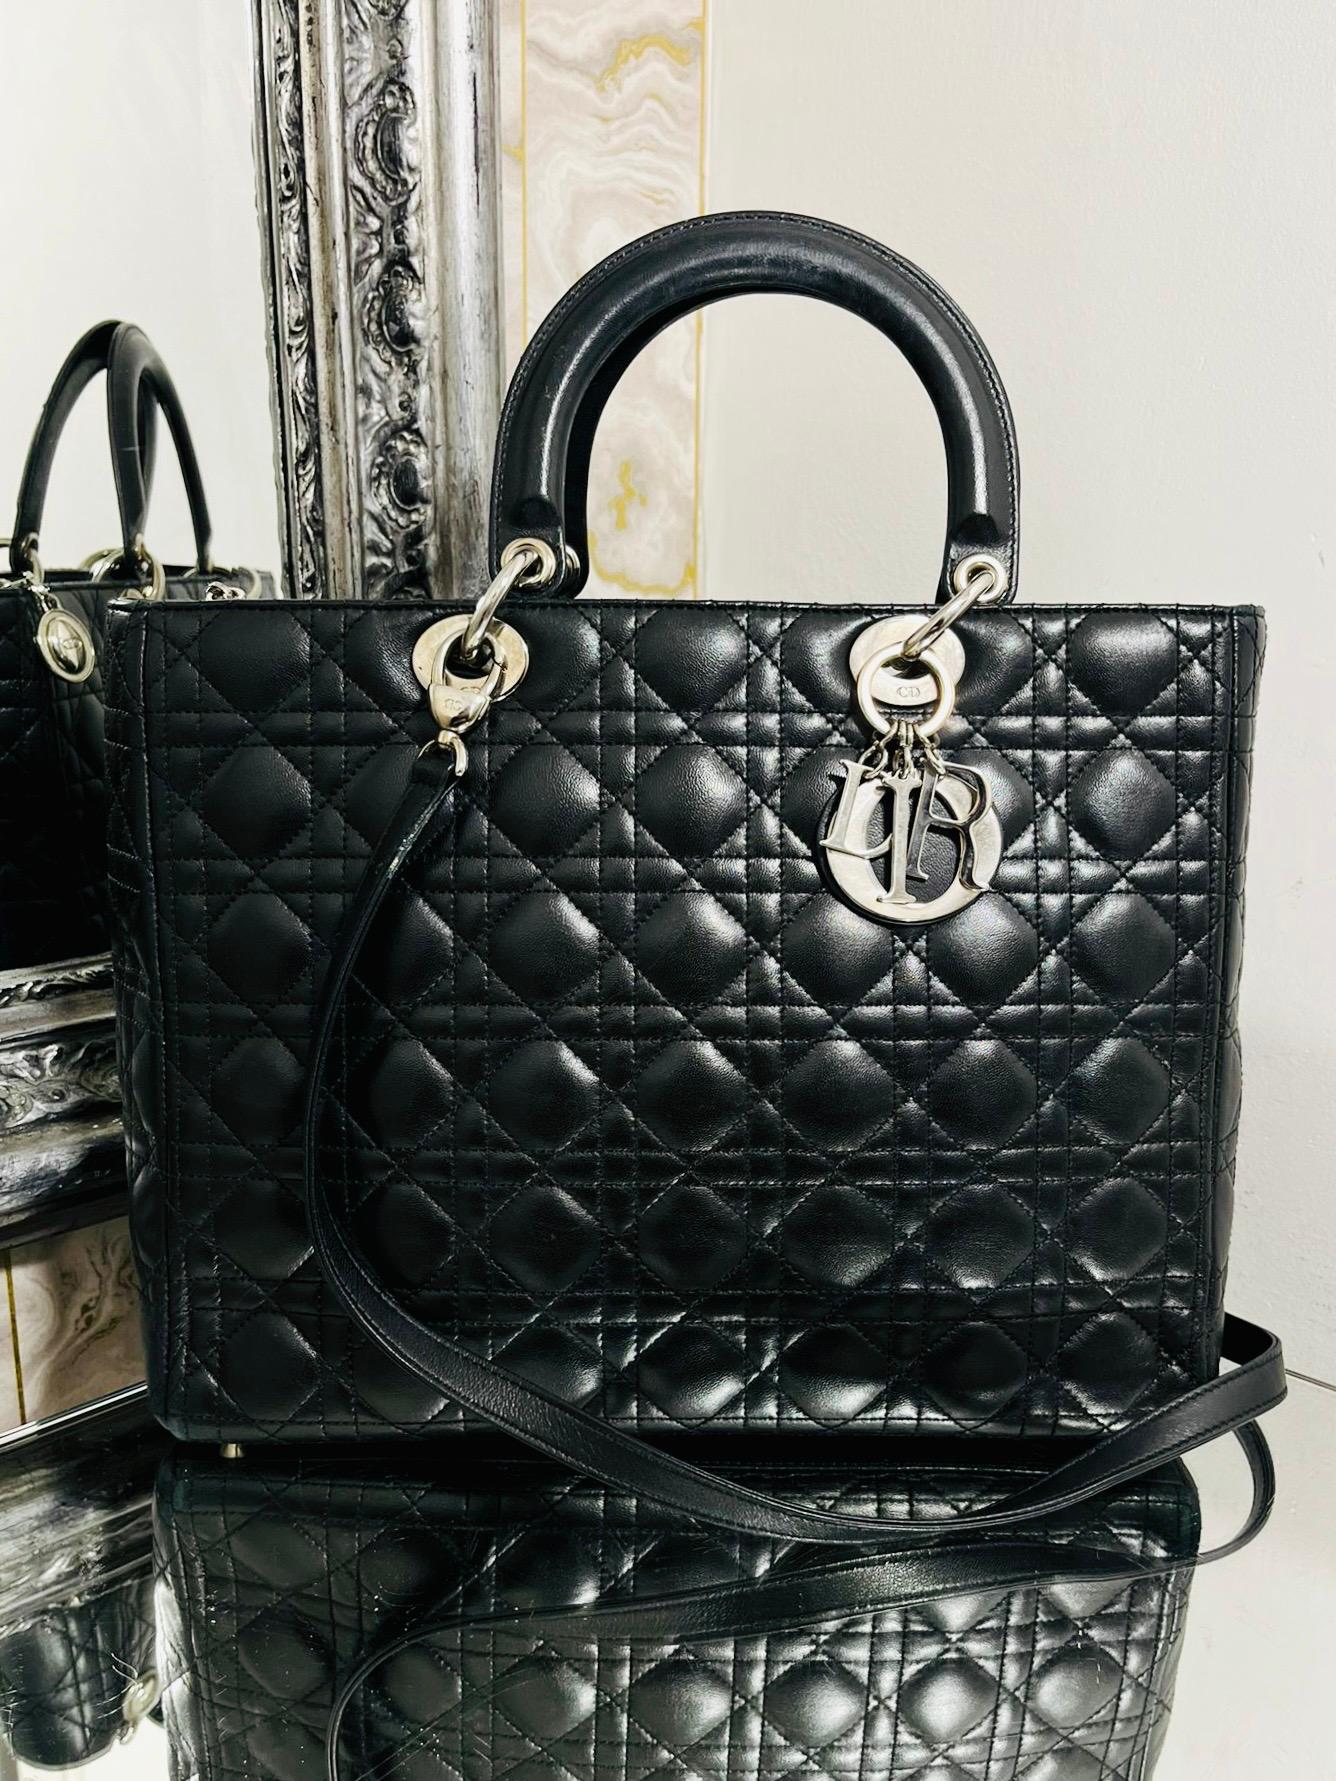 Christian Dior Large Model Lady Dior Bag

Black Lambskin leather in the iconic cannage stich pattern. Top carry

handle and removable shoulder strap. Silver hardware to include 'DIOR' logo charm.

Rrp £5,600.

Size - Large Model - Height 25cm, Width